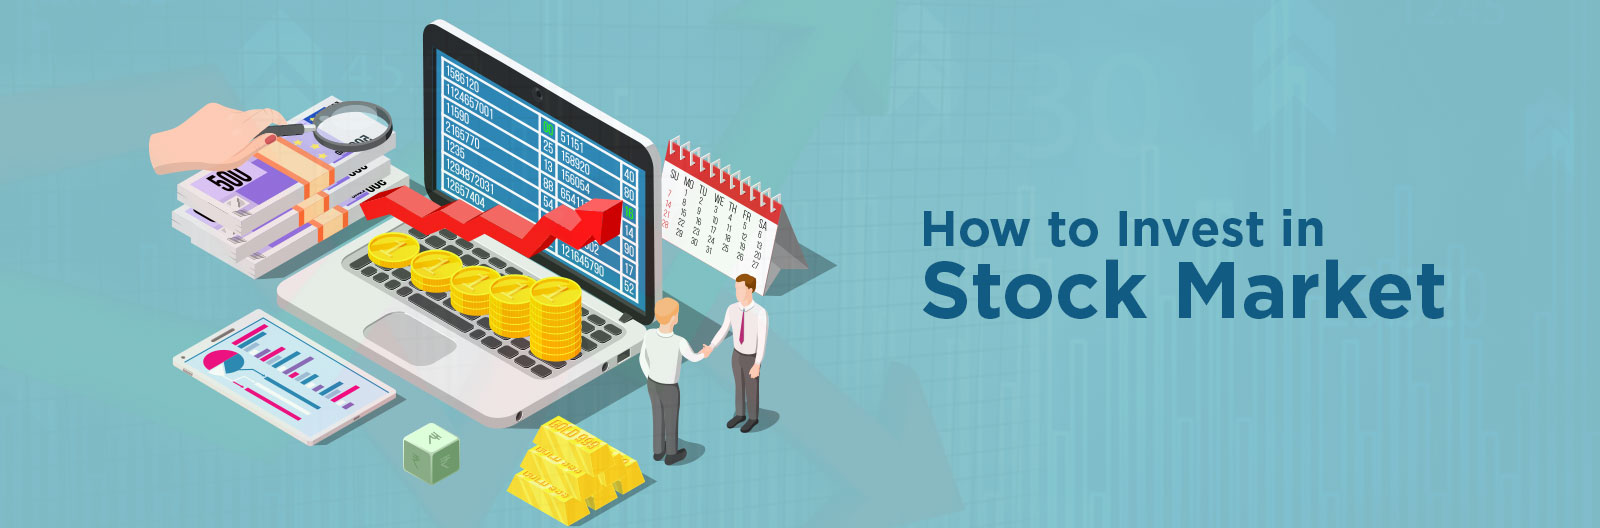 How To Invest In Stock Market With Small Income Basic Guide For 7234